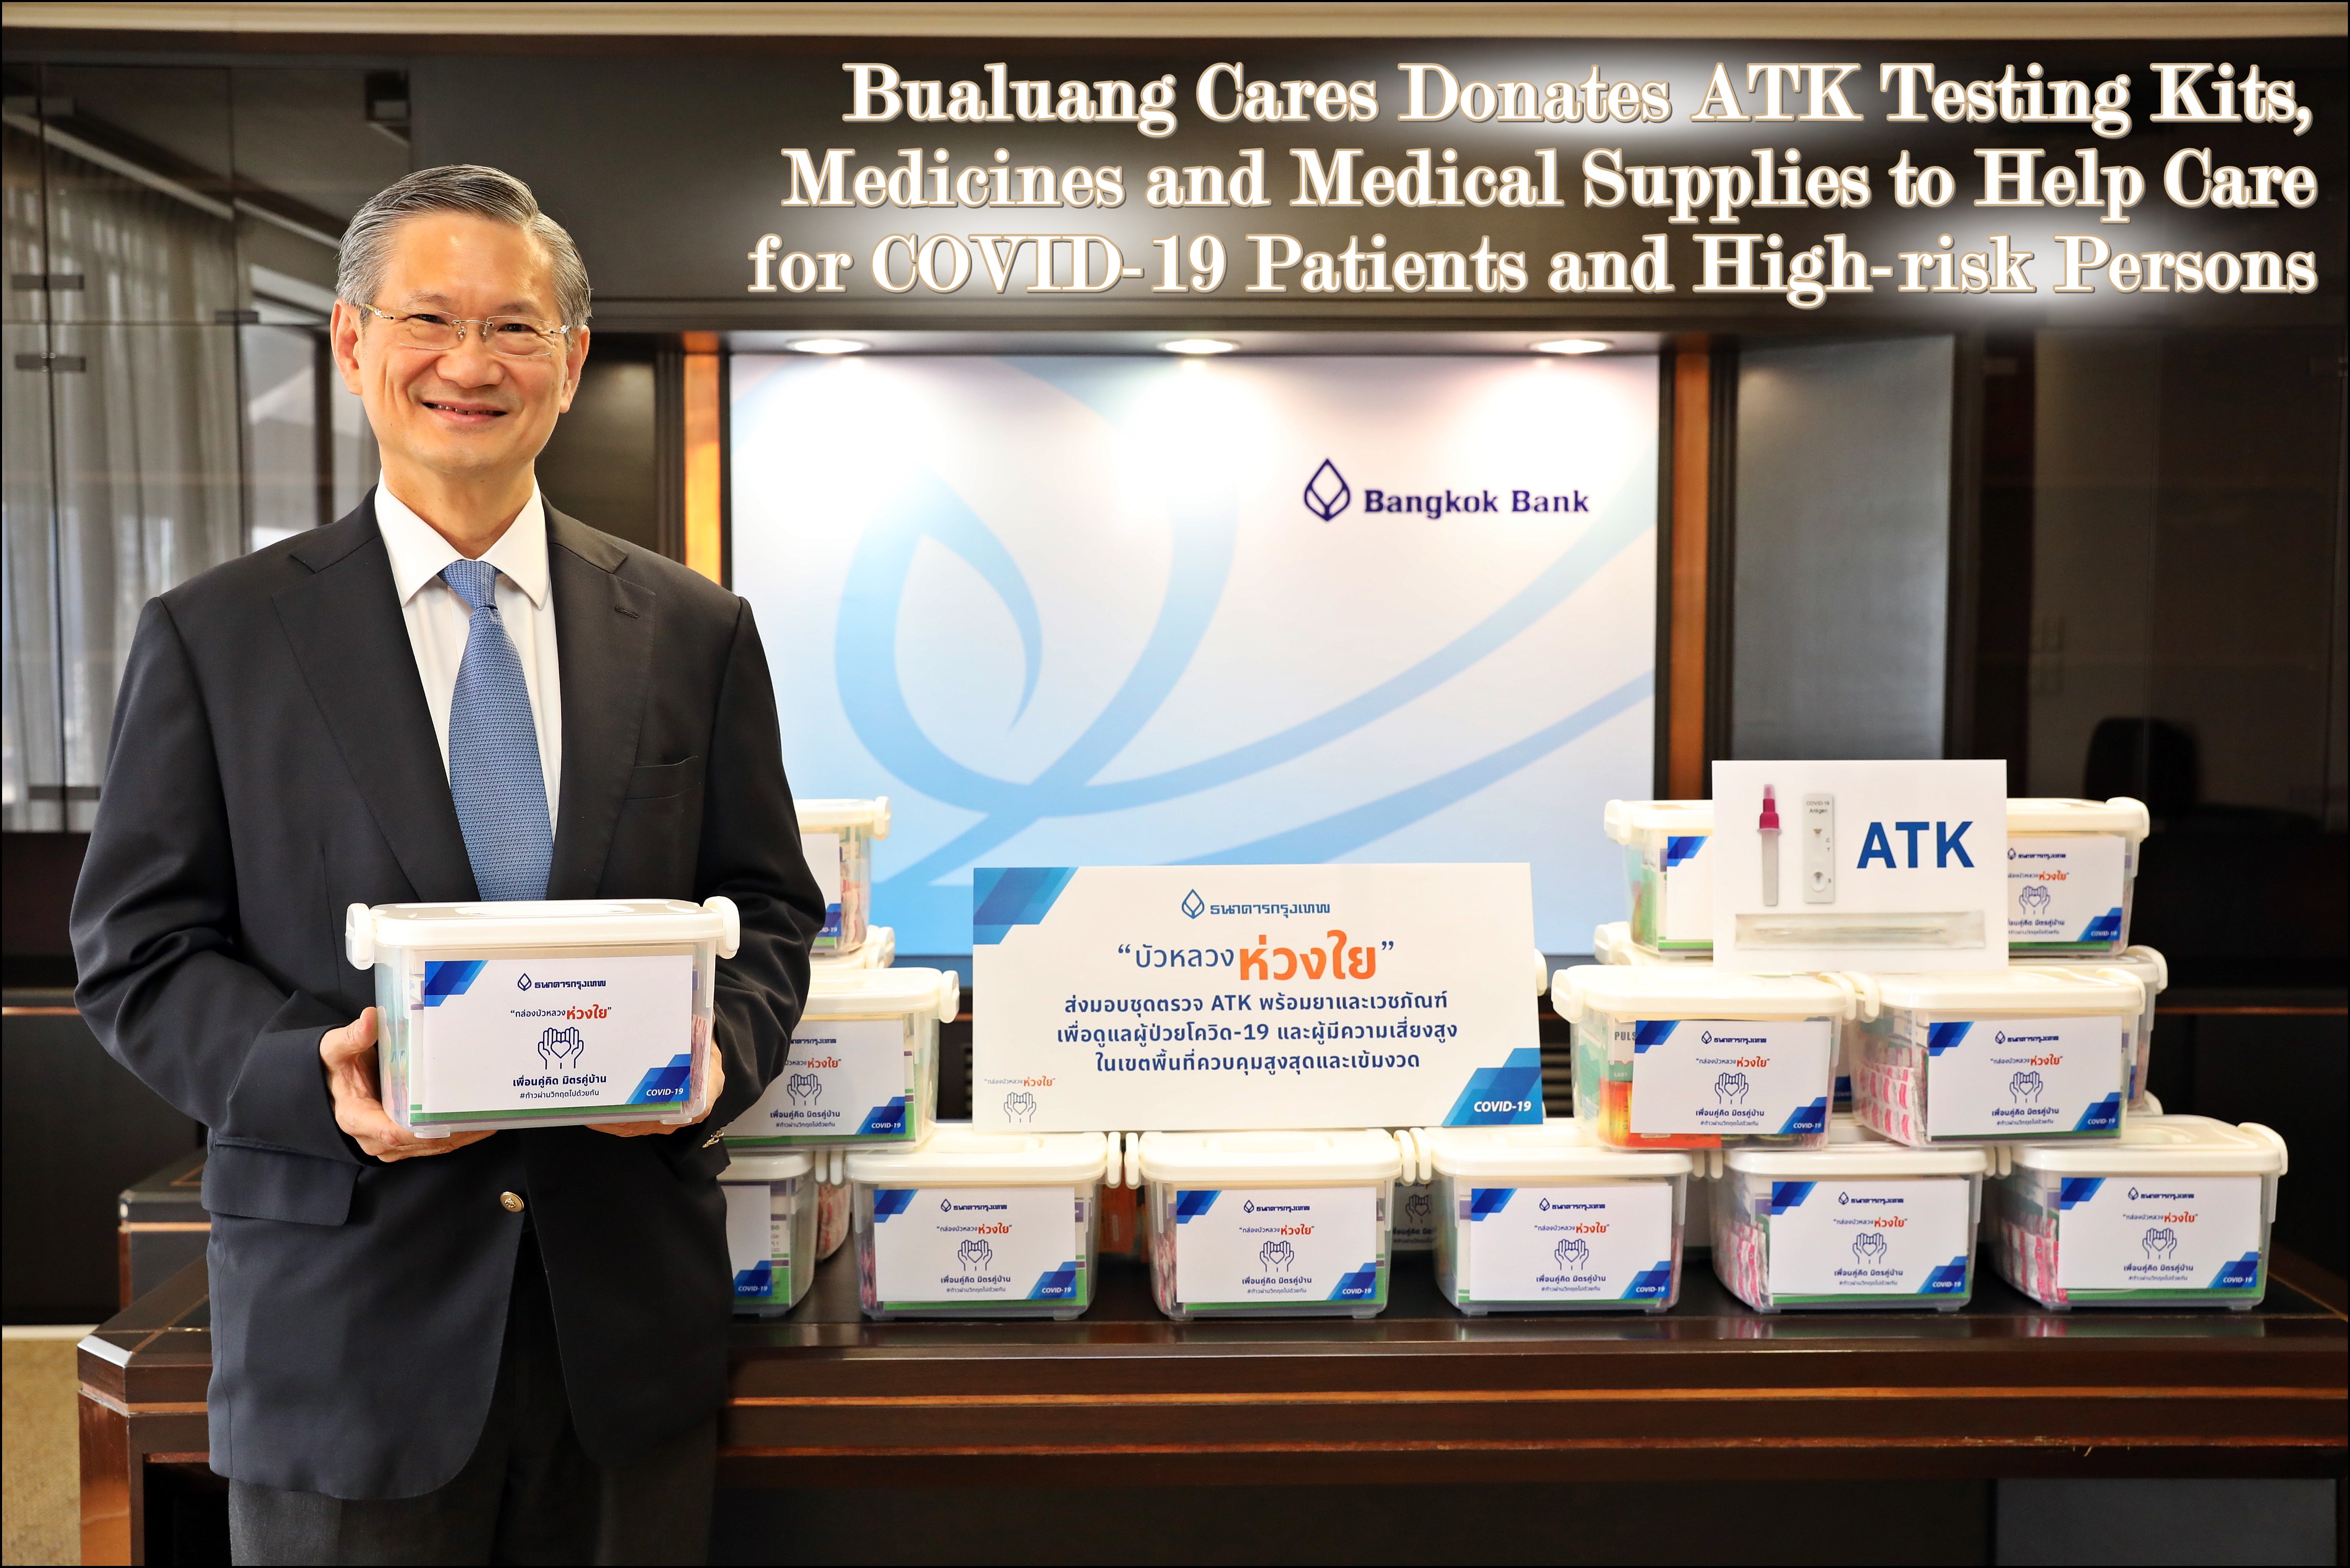 Bualuang Cares Donates ATK Testing Kits, Medicines and Medical Supplies  to Help Care for COVID-19 Patients and High-risk Persons